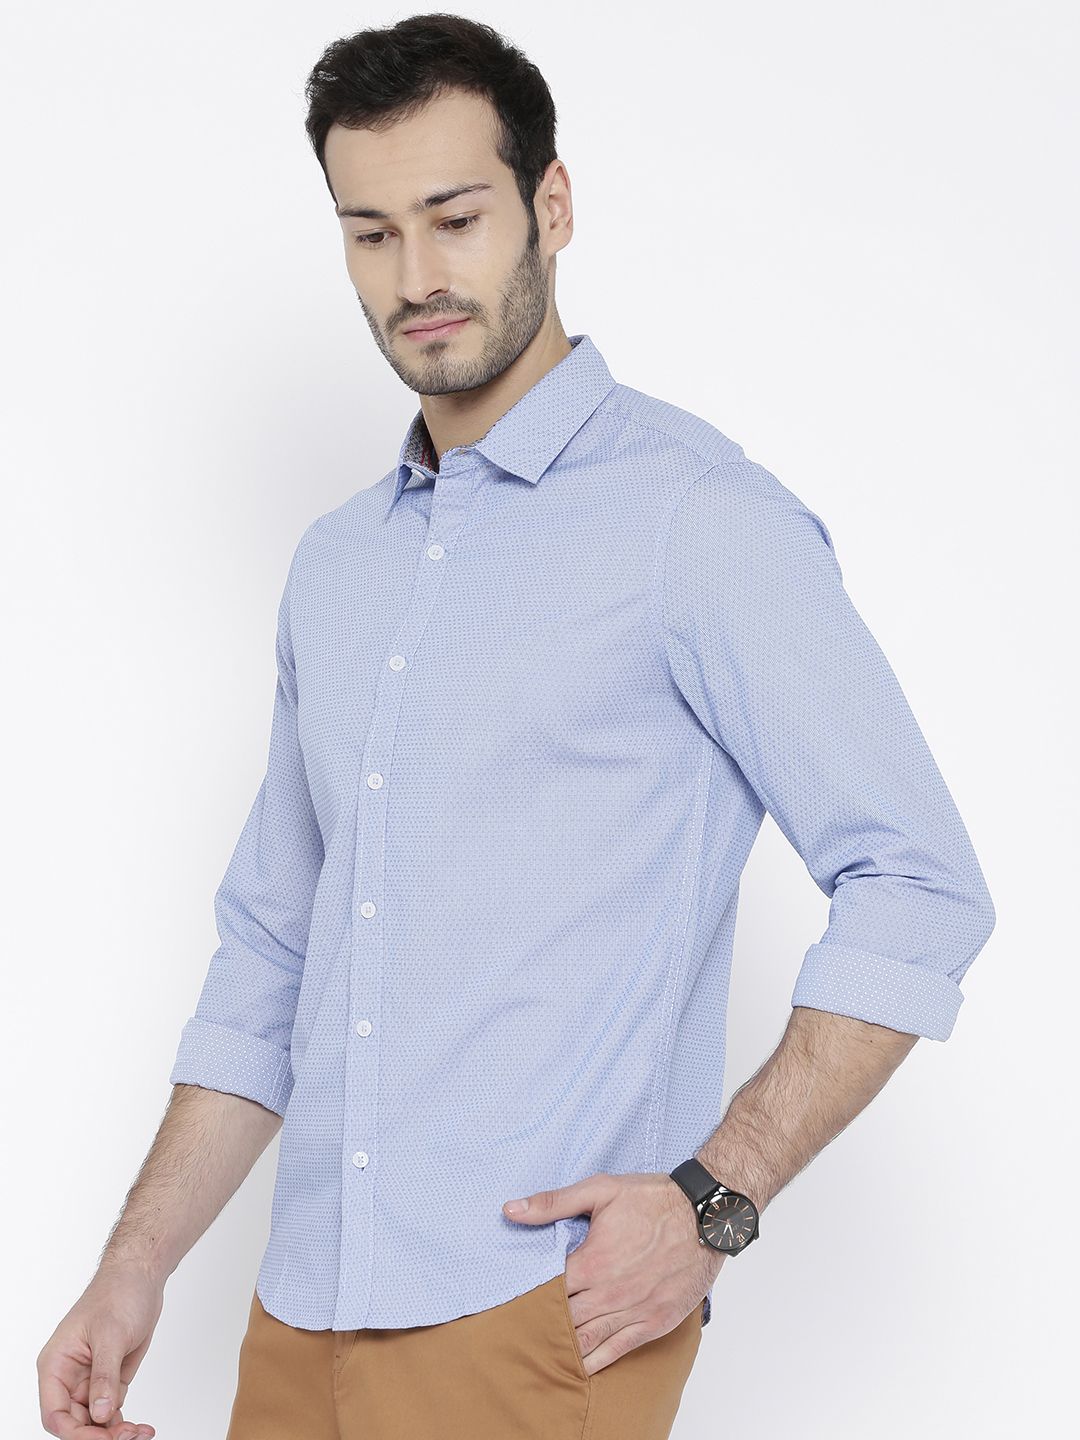 United Colors of Benetton Grey Slim Fit Shirt - Buy United Colors of ...